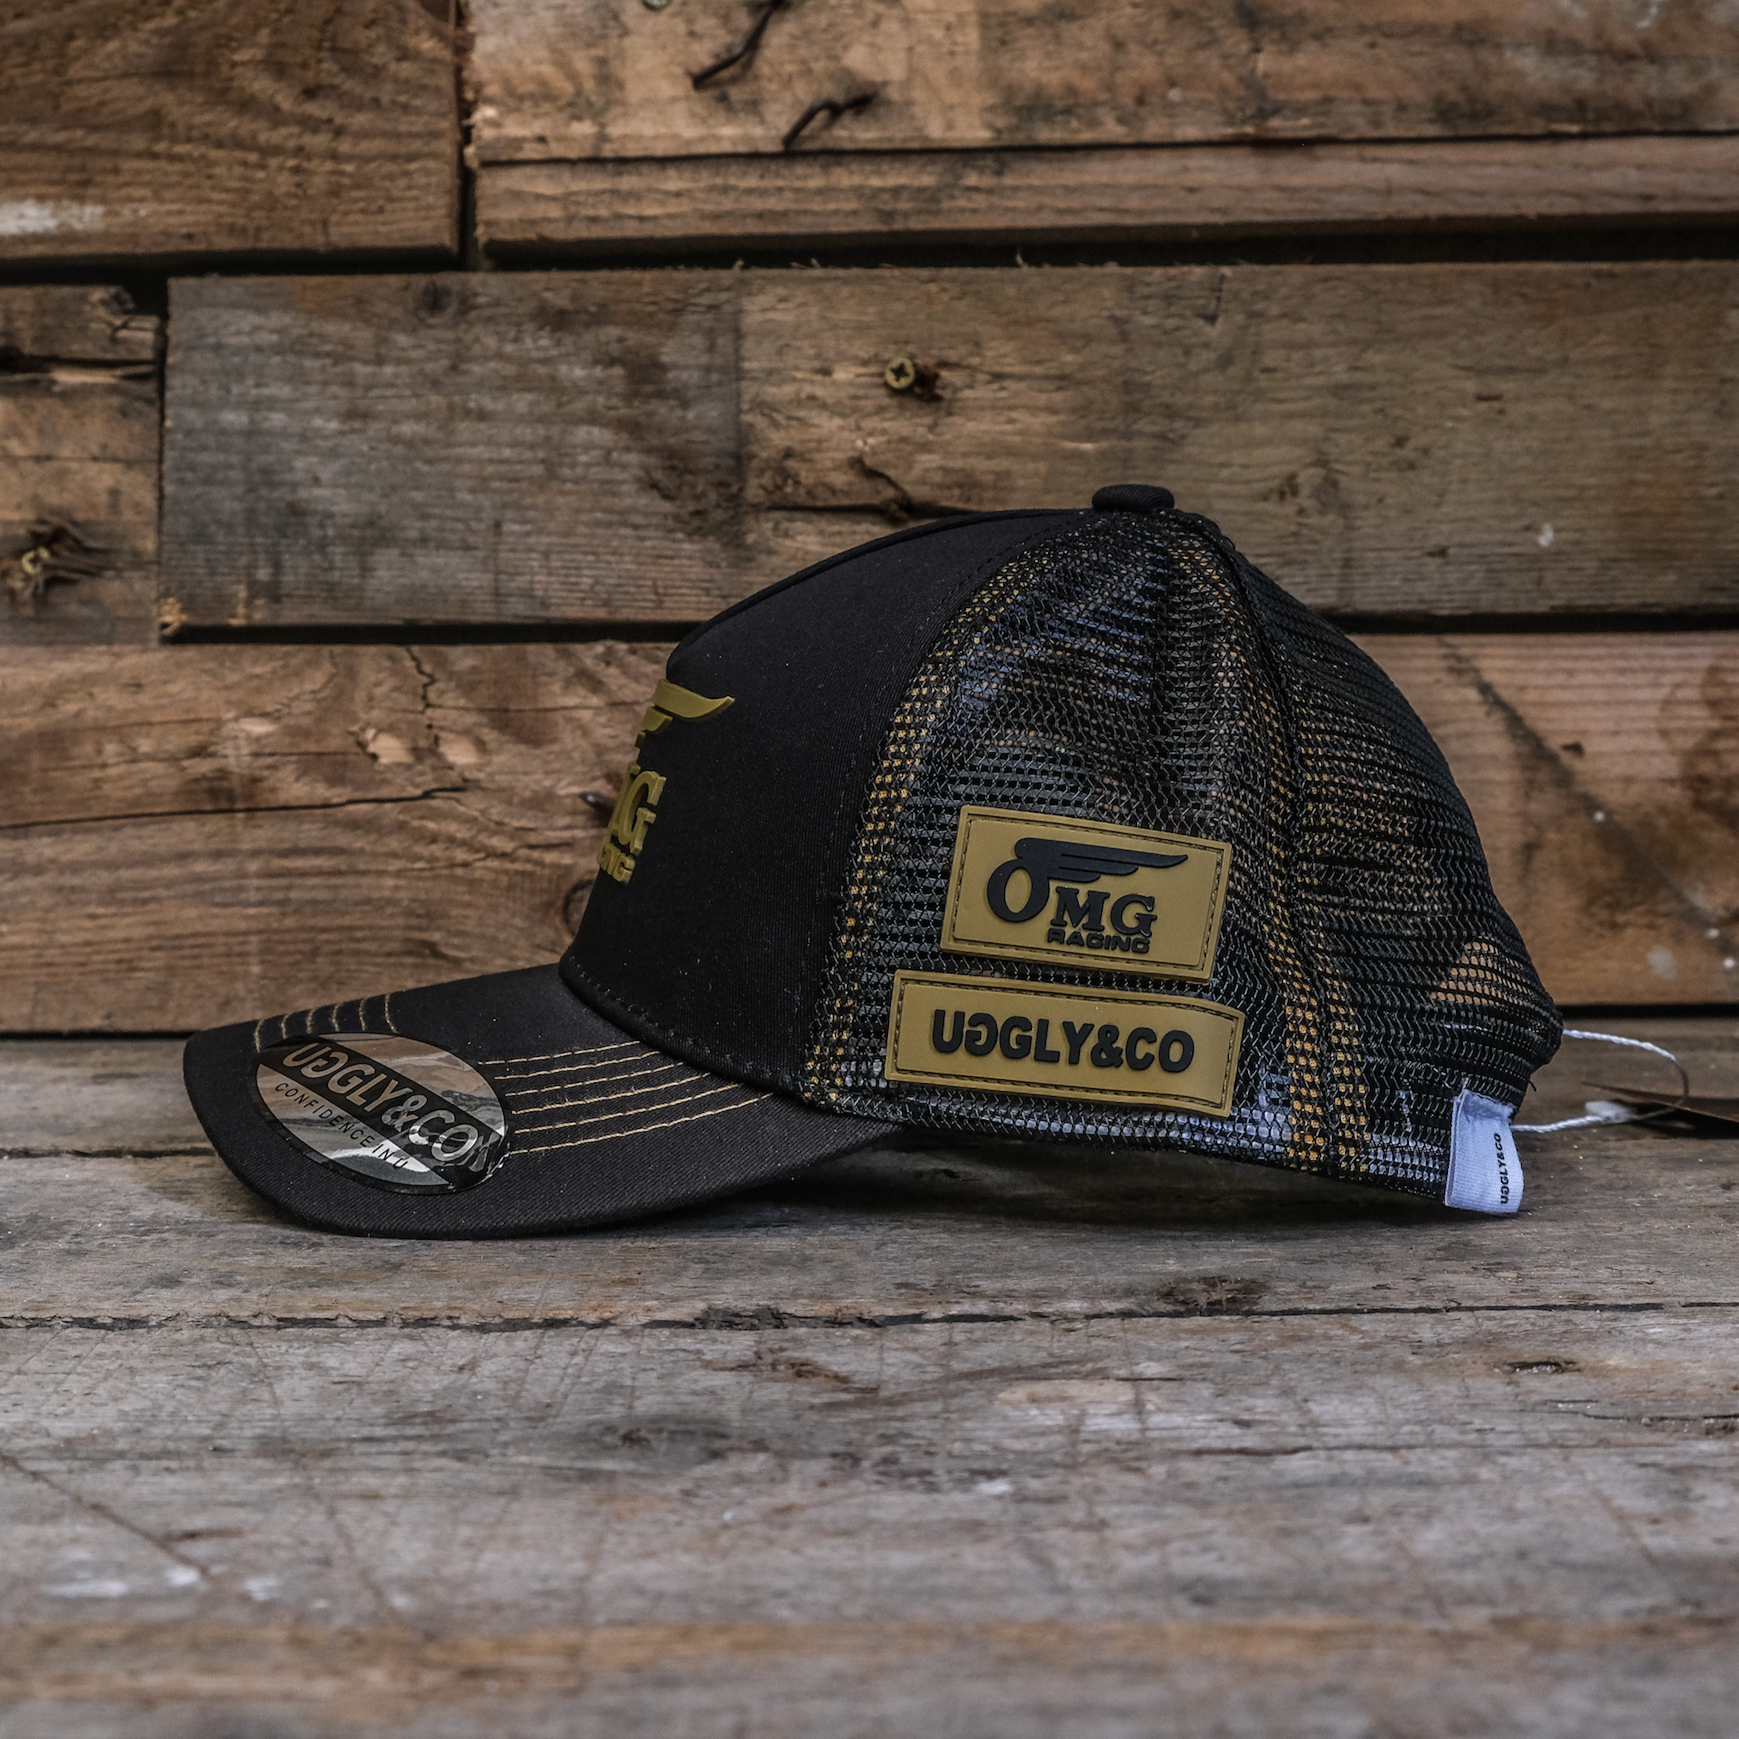 OMG Racing Cap – Uggly and Co